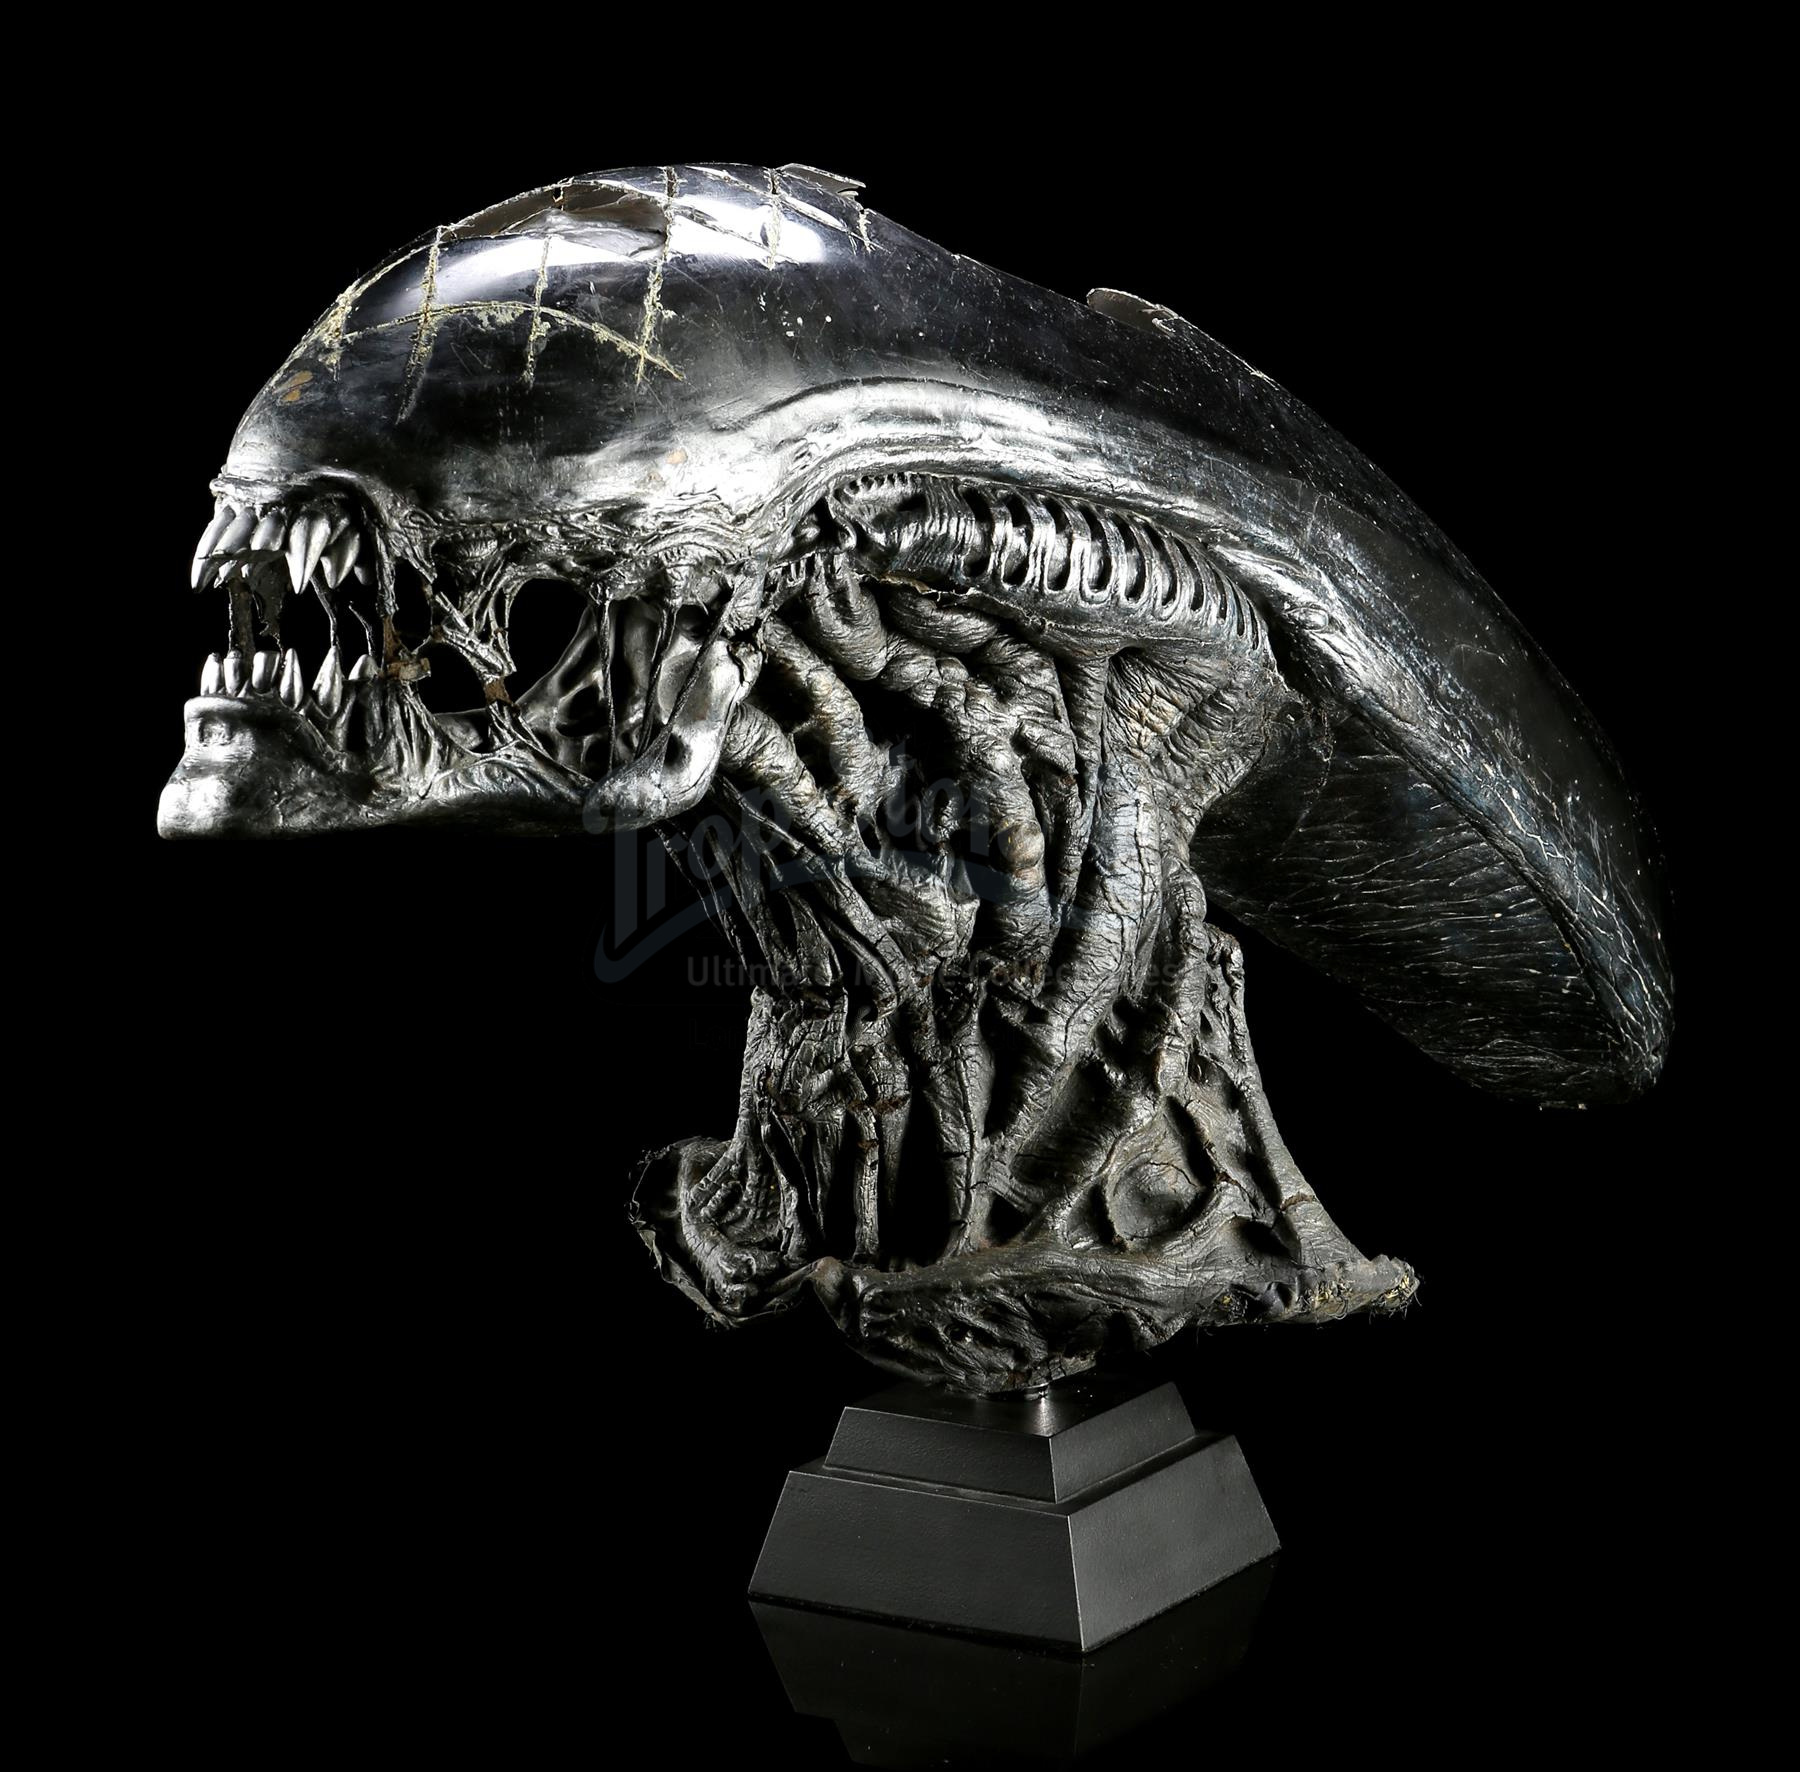  Prop Store's Live Auction 29th September 2017 - Alien and Predator Props